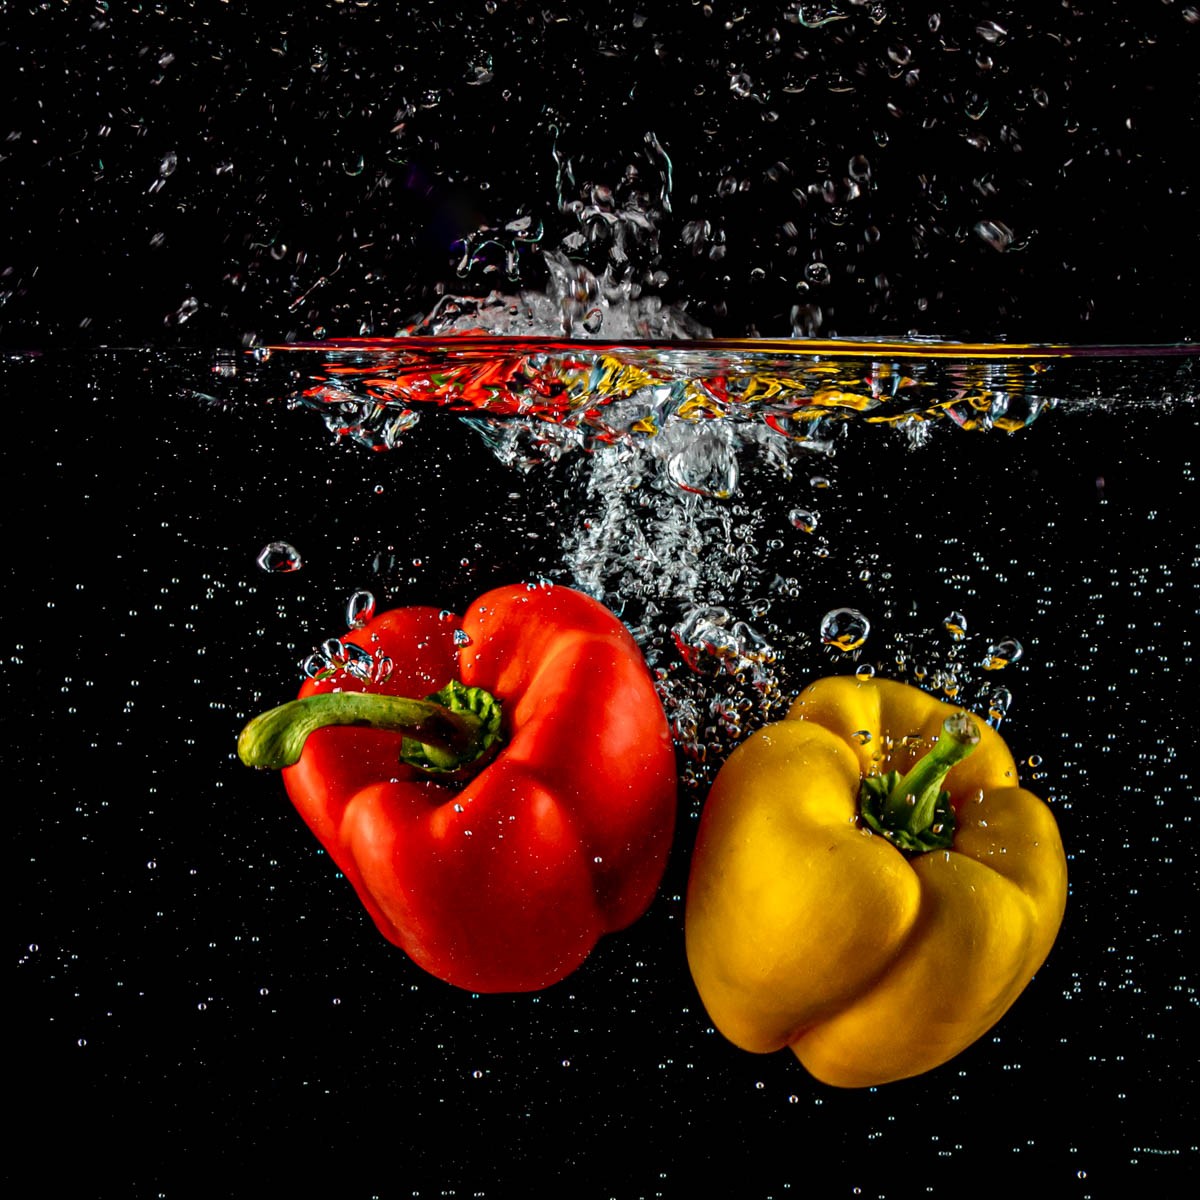 A Drop of Red Pepper by Yvonne Deed